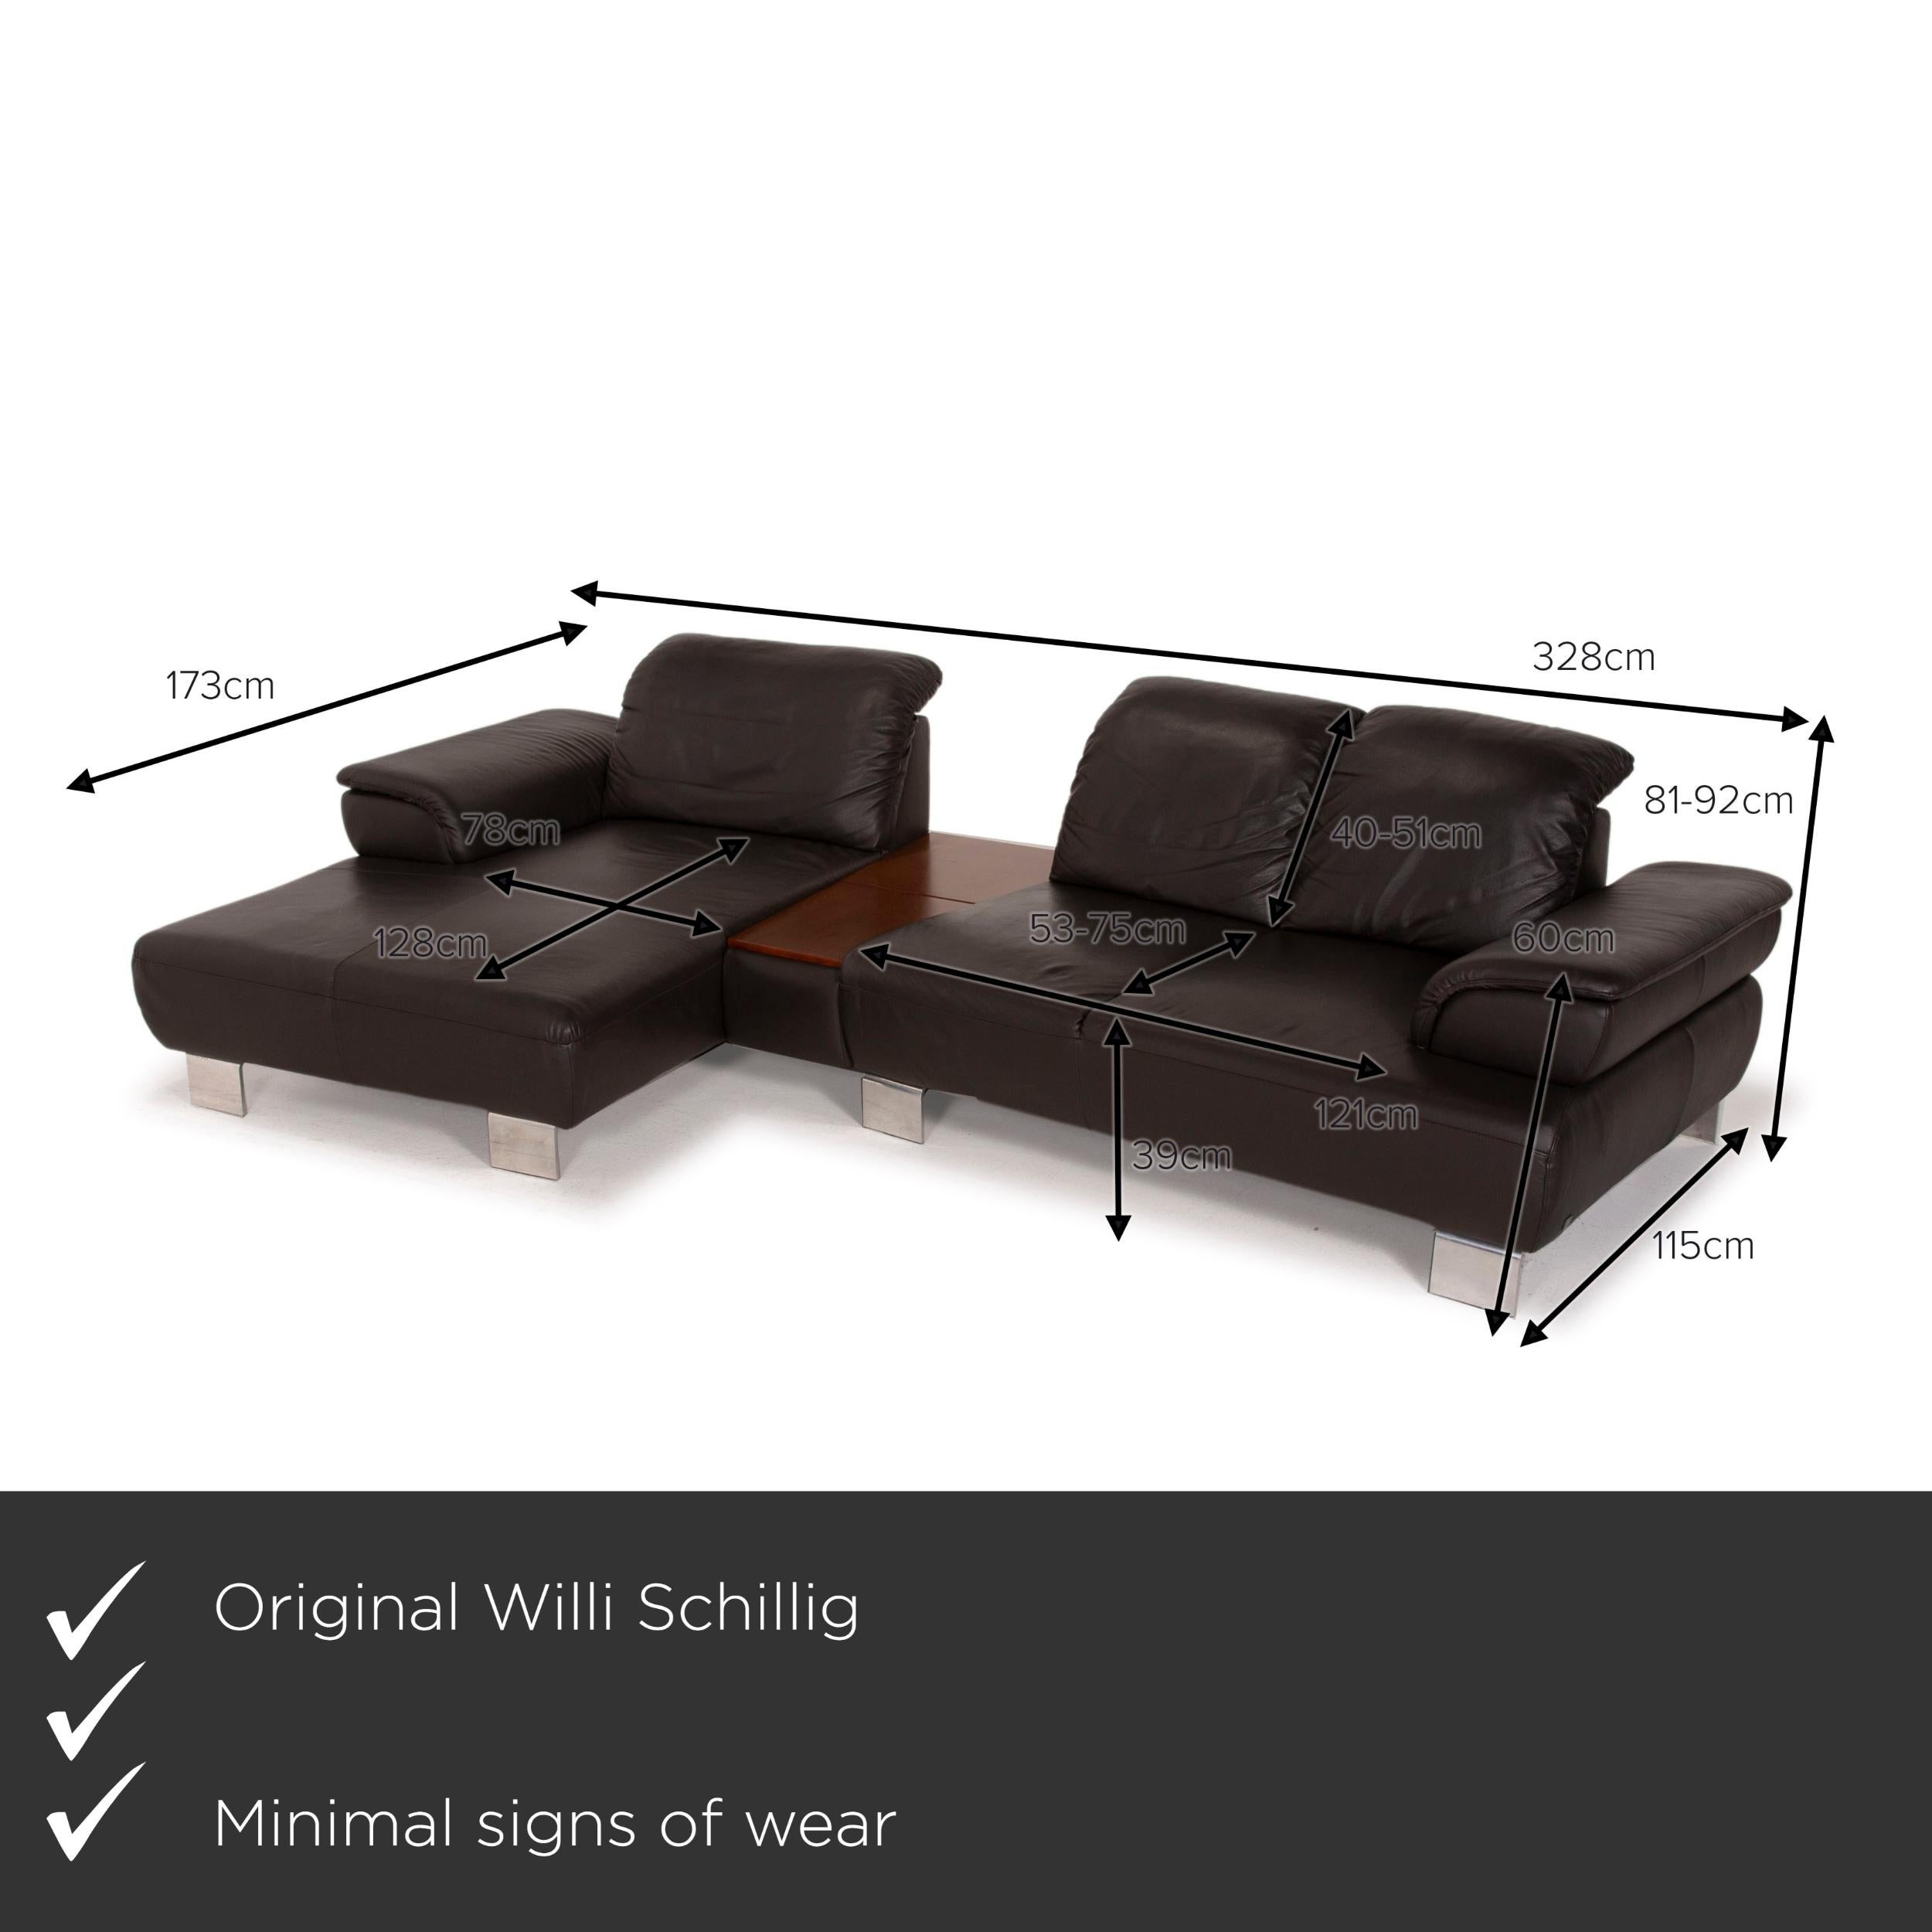 We present to you a Willi Schillig leather sofa brown corner sofa function dark brown.


 Product measurements in centimeters:
 

Depth: 115
Width: 173
Height: 81
Seat height: 39
Rest height: 60
Seat depth: 128
Seat width: 78
Back